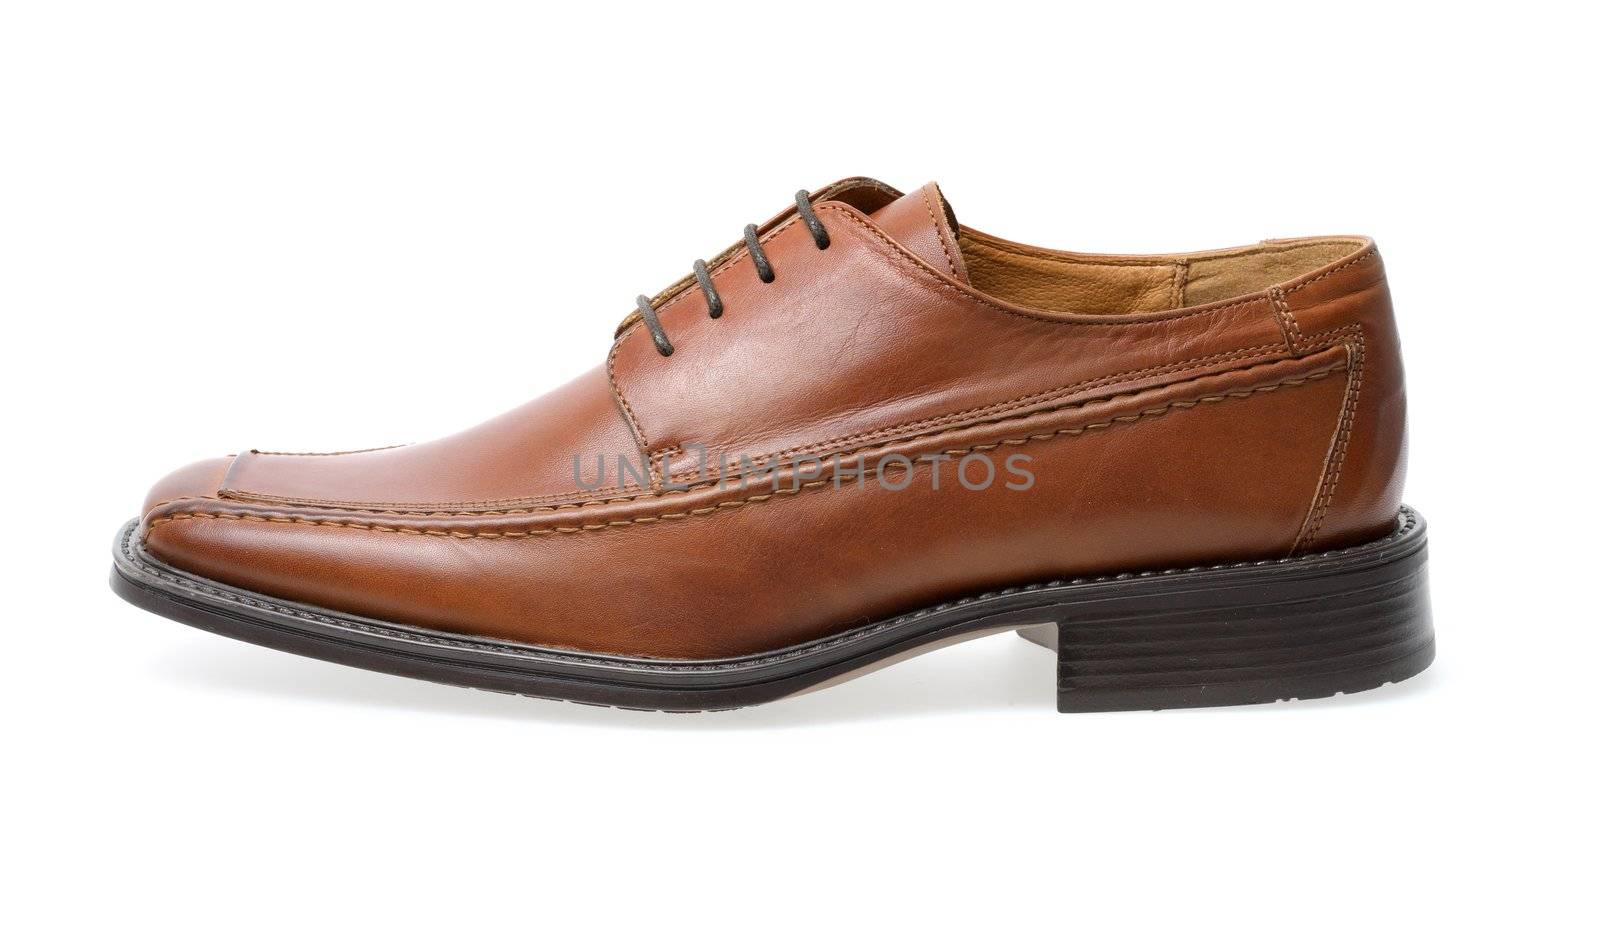 New men's brown leather shoe isolated on white